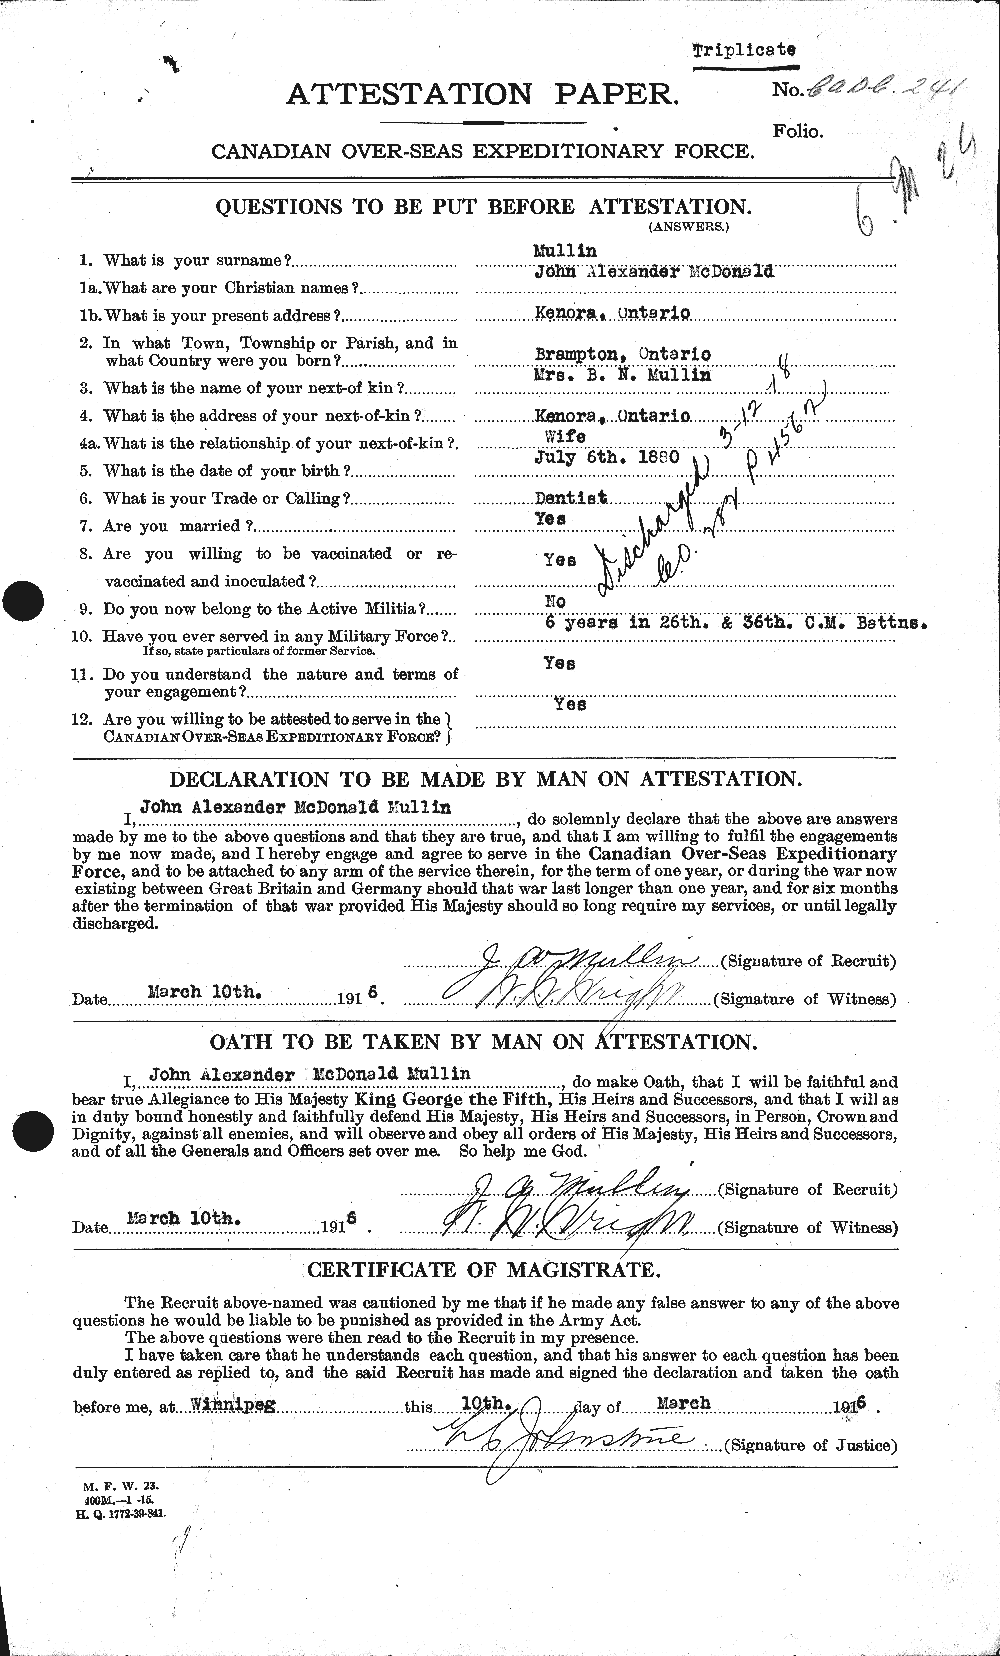 Personnel Records of the First World War - CEF 513431a